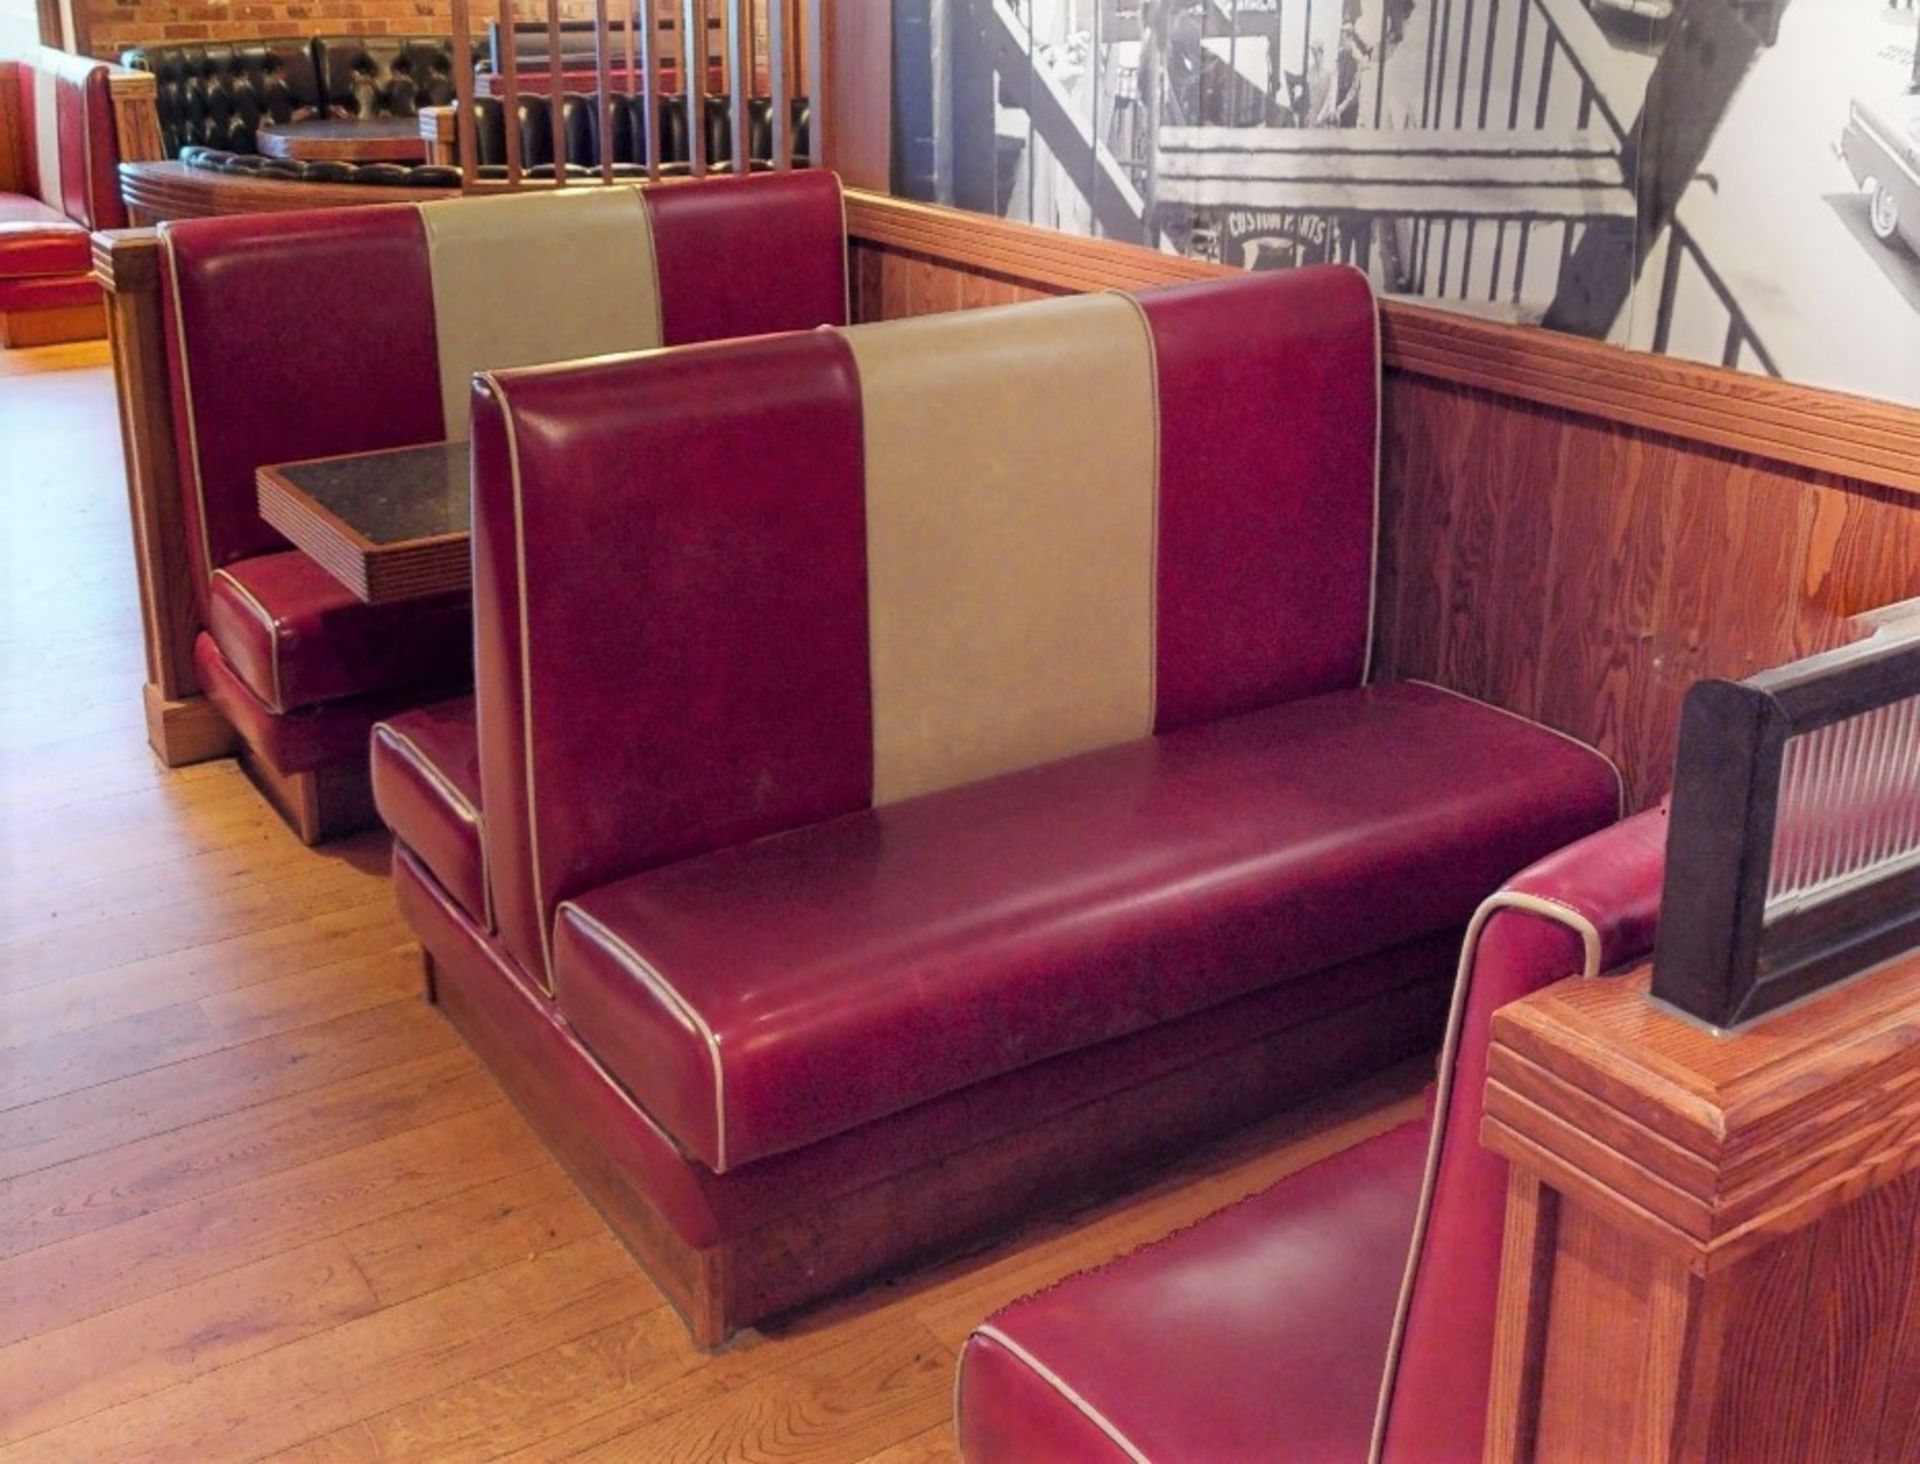 Selection of Double Seating Benches and Dining Tables to Seat Upto 12 Persons - Image 3 of 5